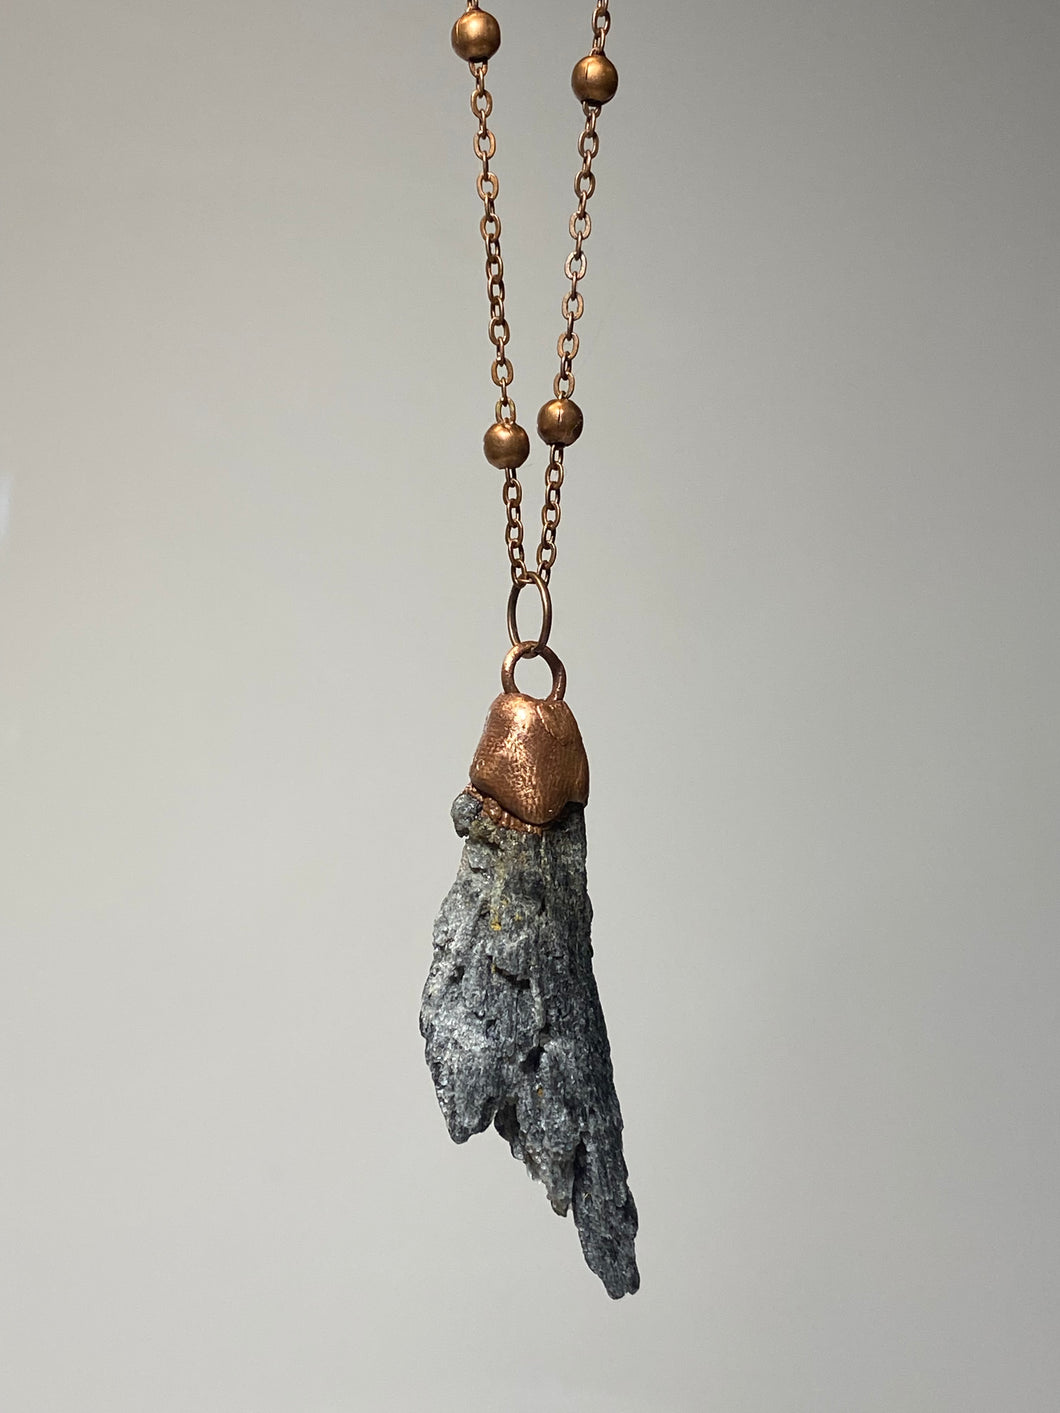 Copper-plated Kyanite Necklace